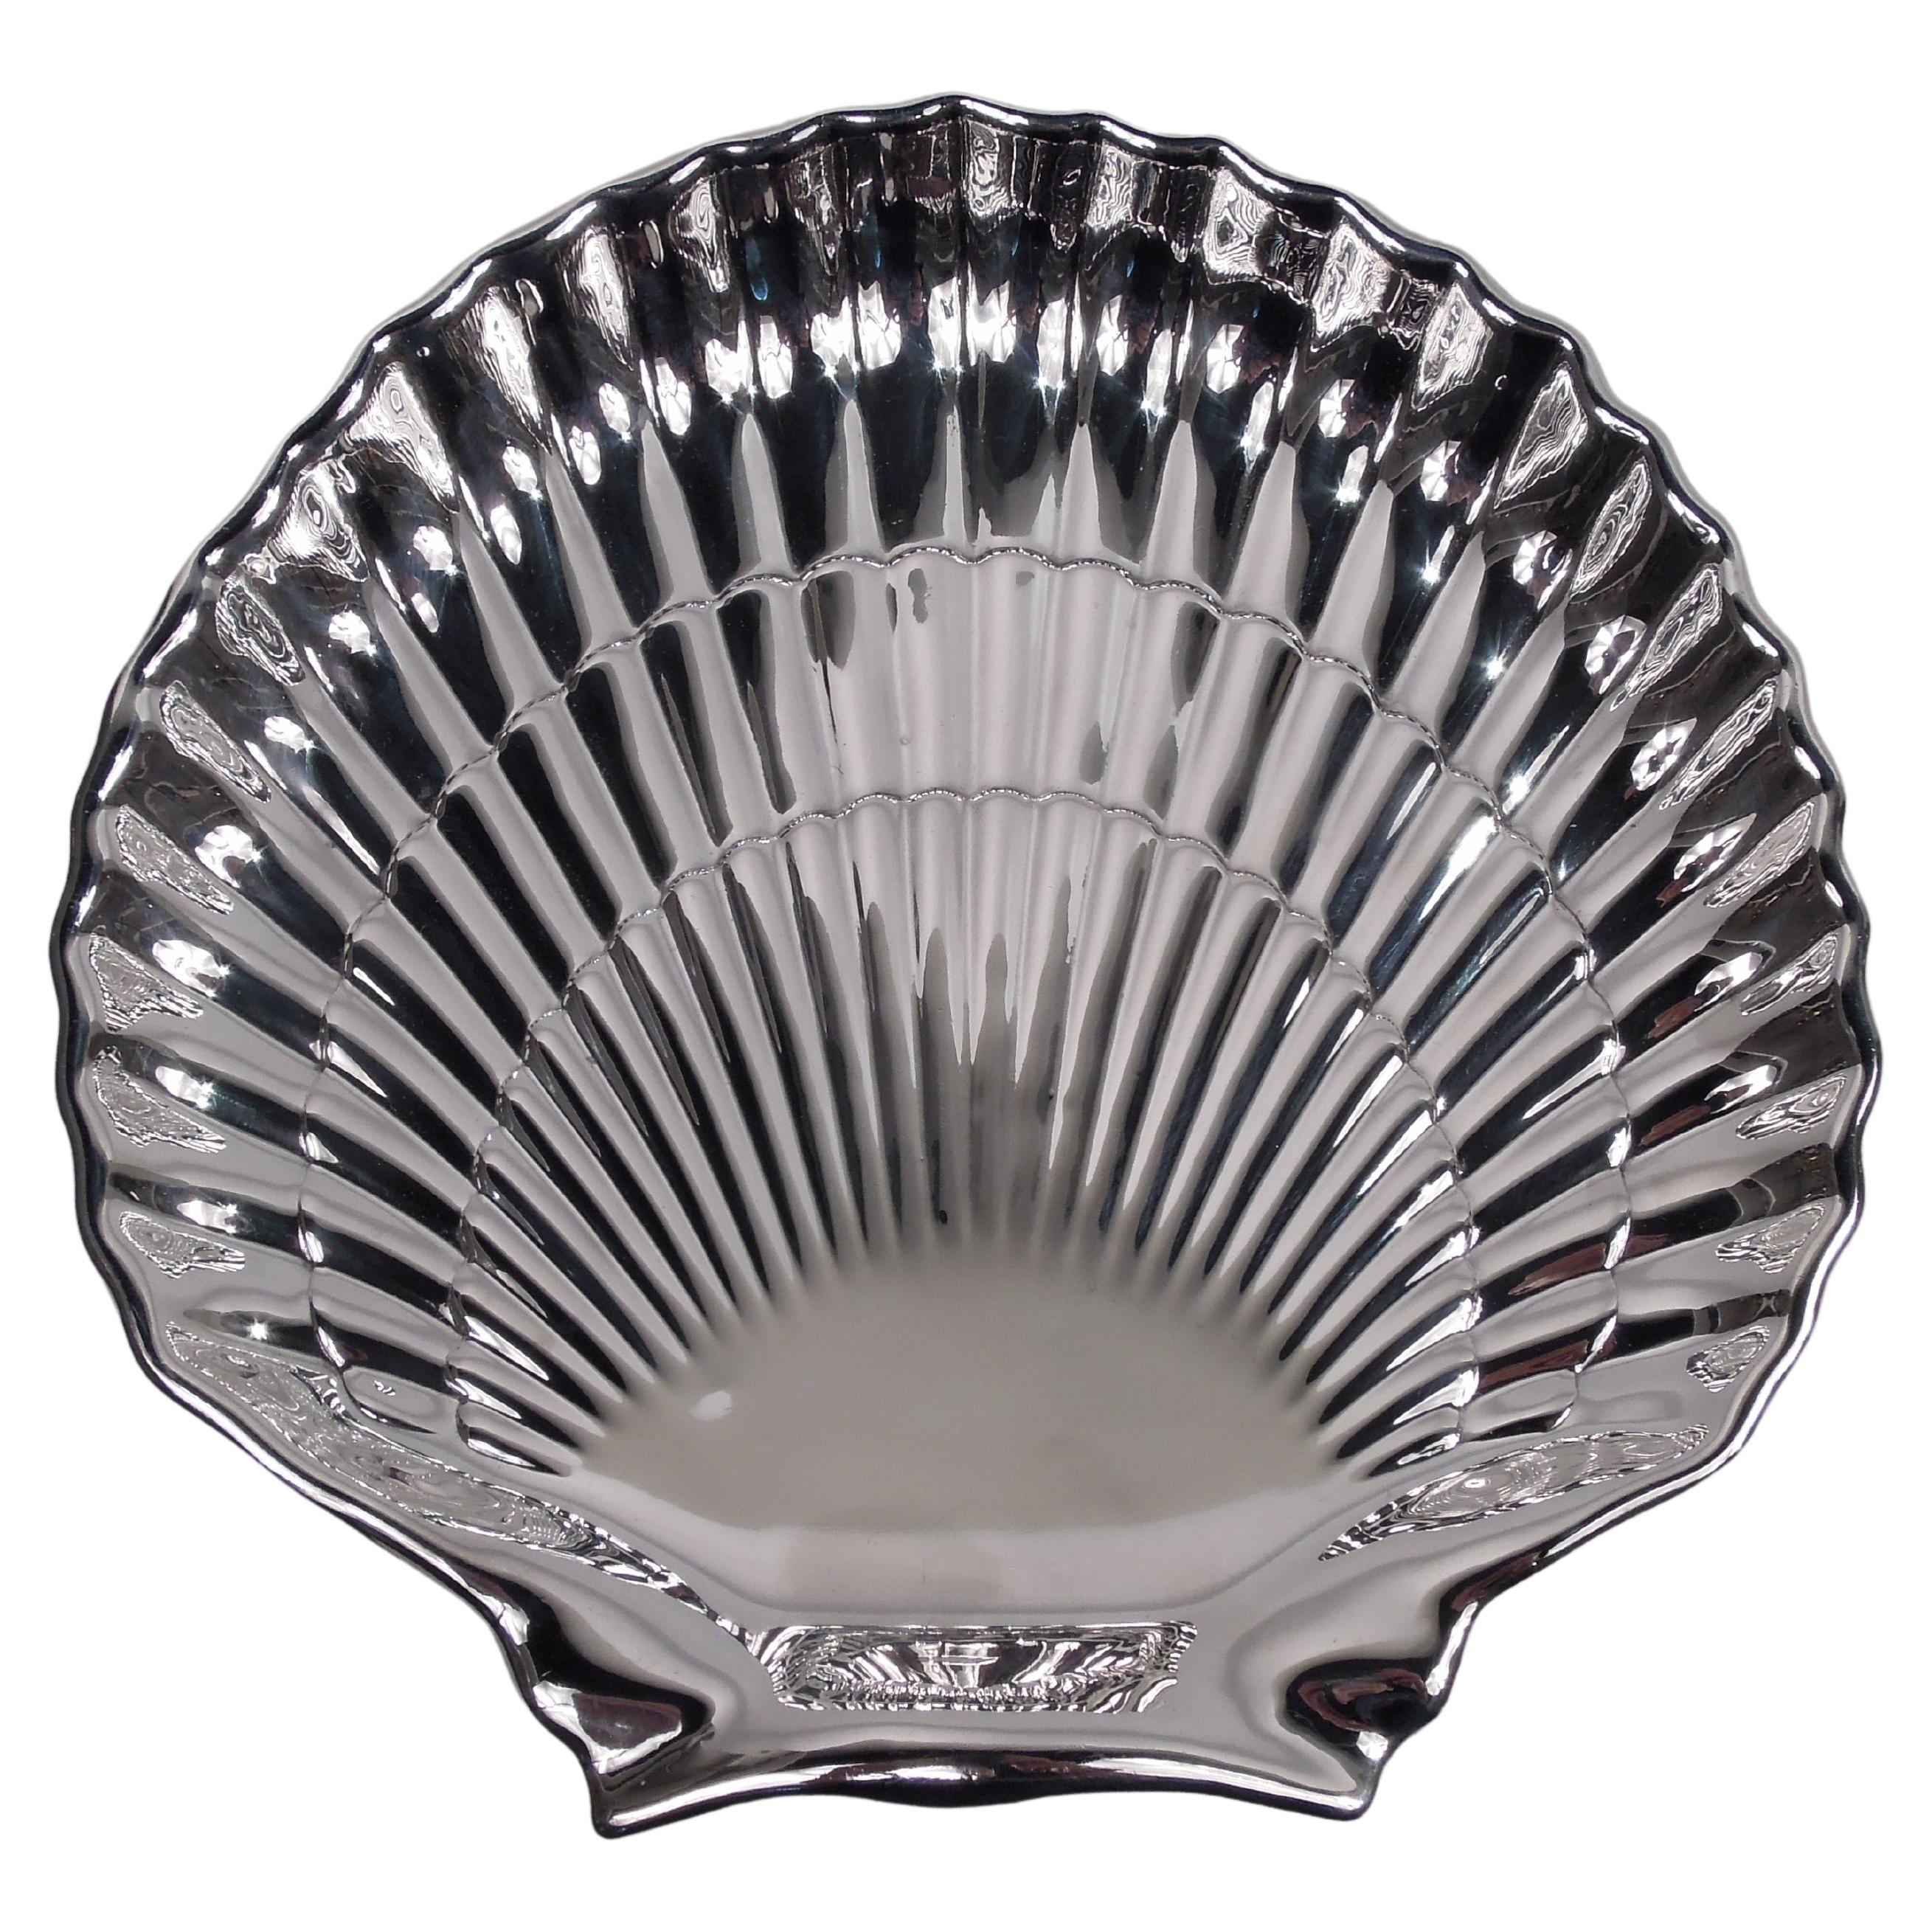 Large Gorham Modern Classical Sterling Silver Scallop Shell Dish, 1947